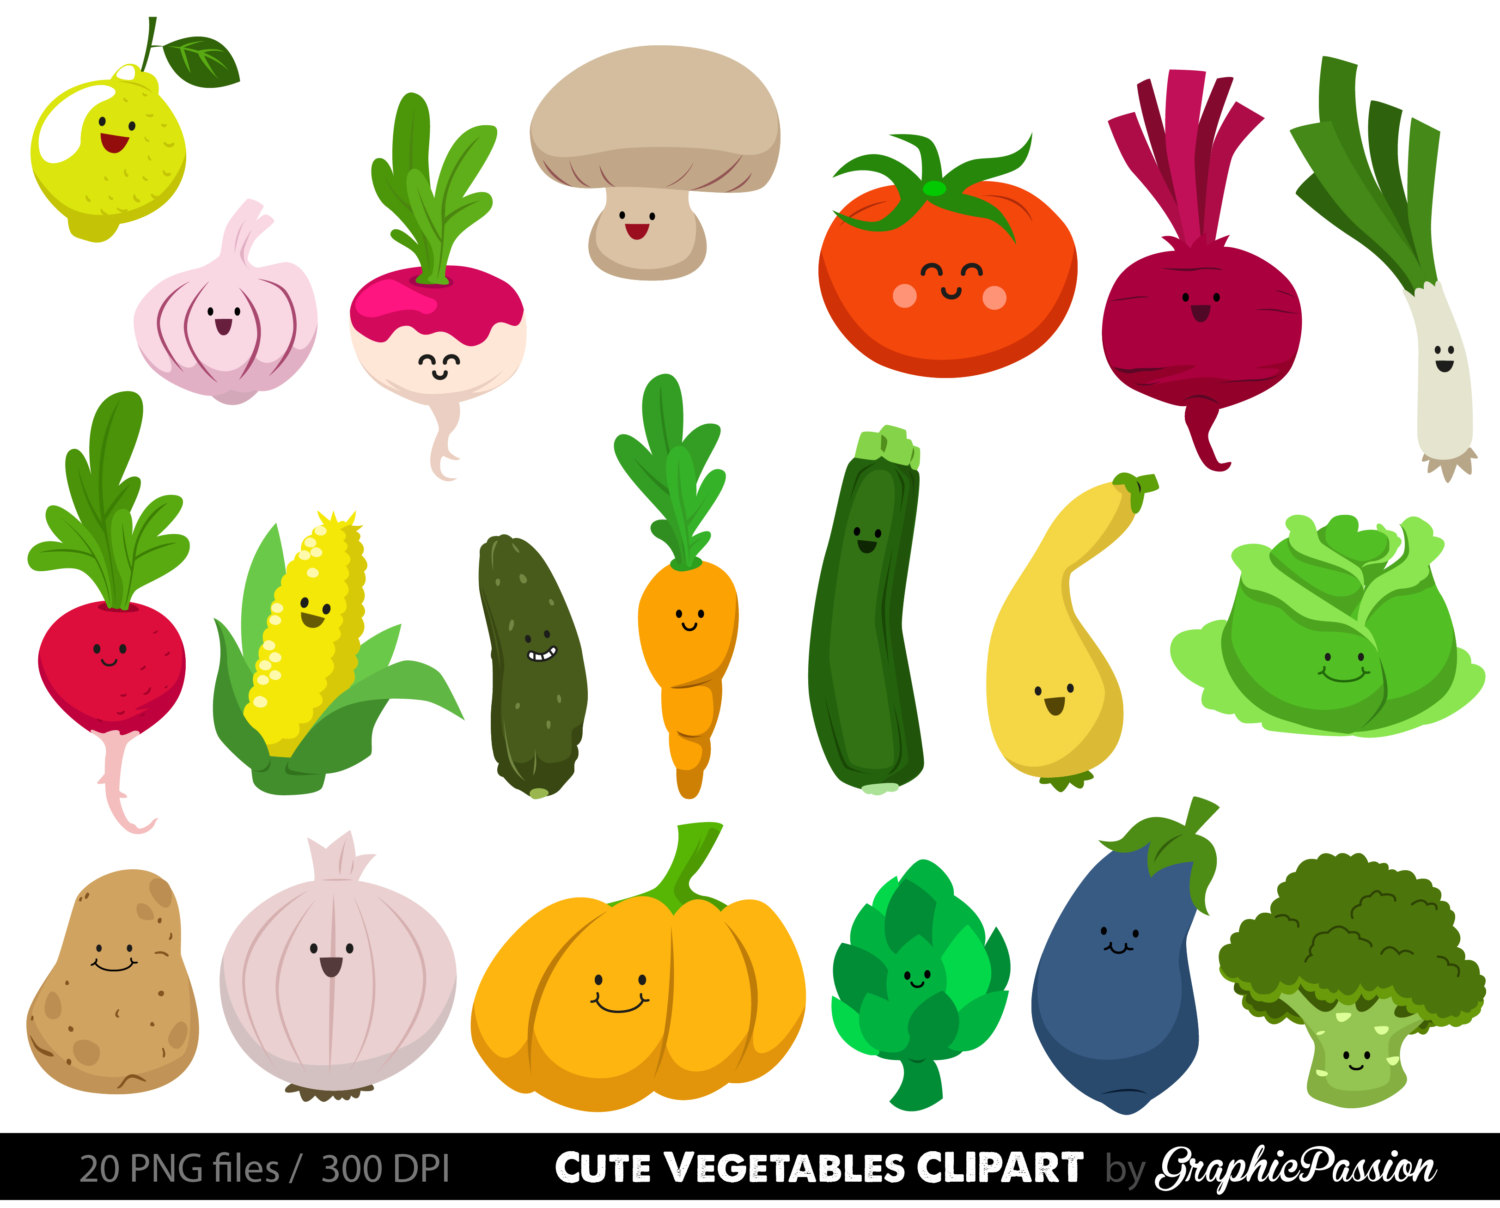 Free fruit and vegetables cli